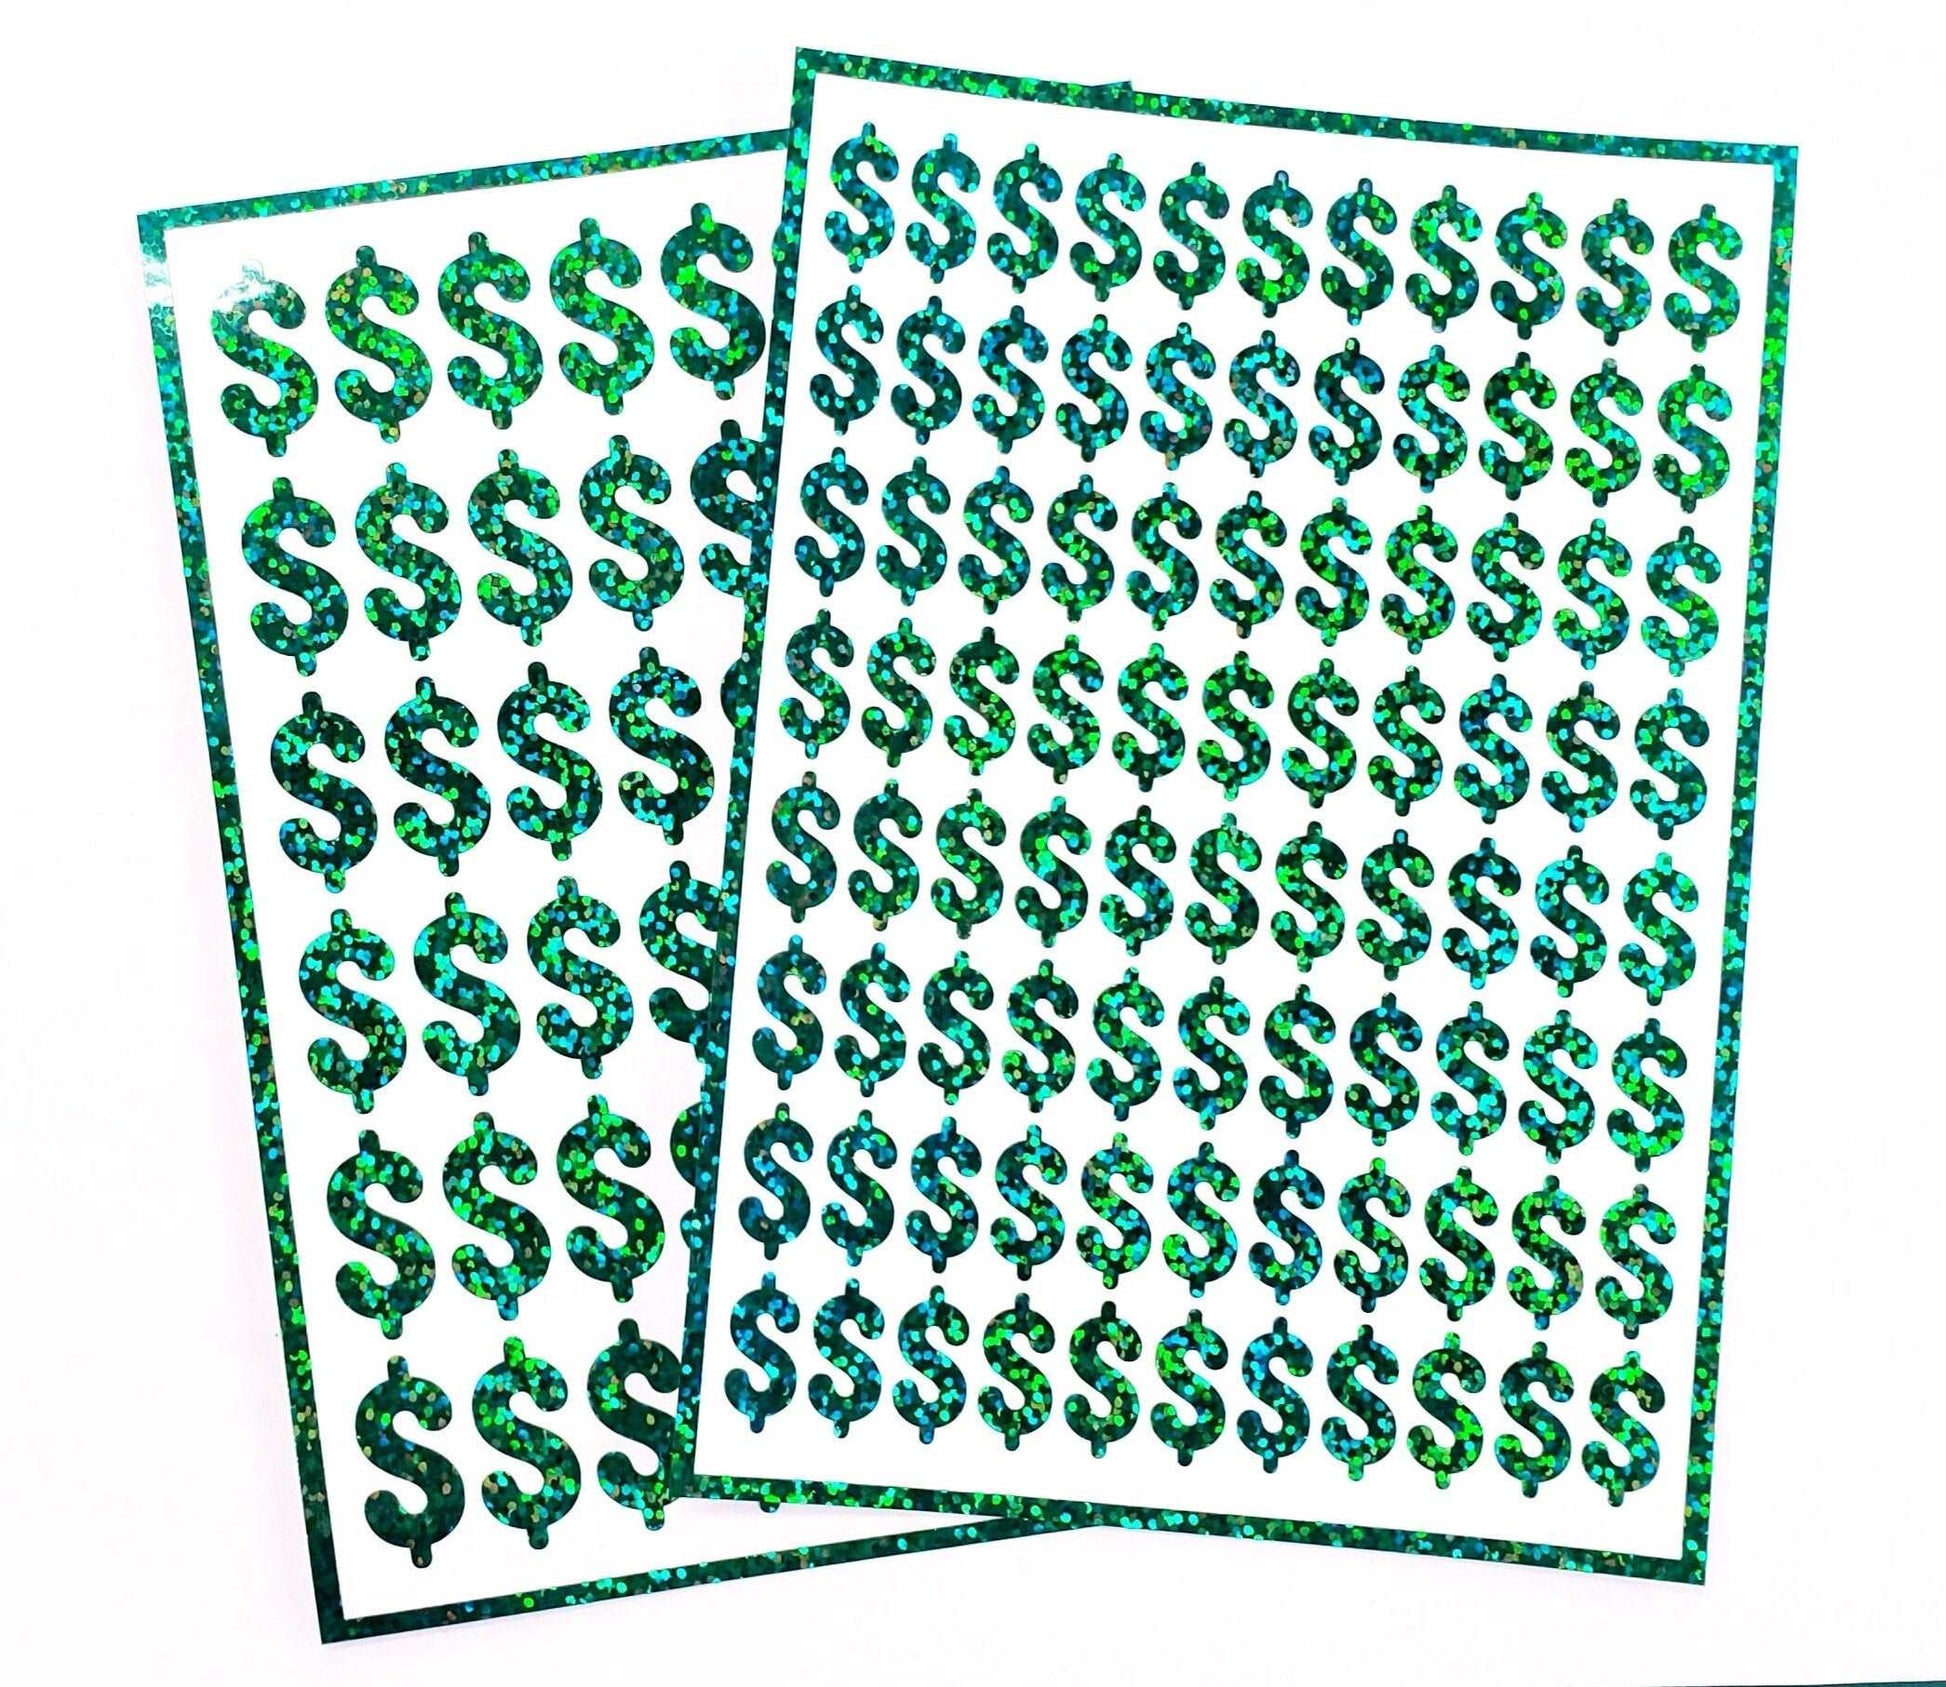 Dollar Sign Money Stickers for household budgets, financial planning and cash stuffing envelopes. Set of 88 small green glitter dollar signs